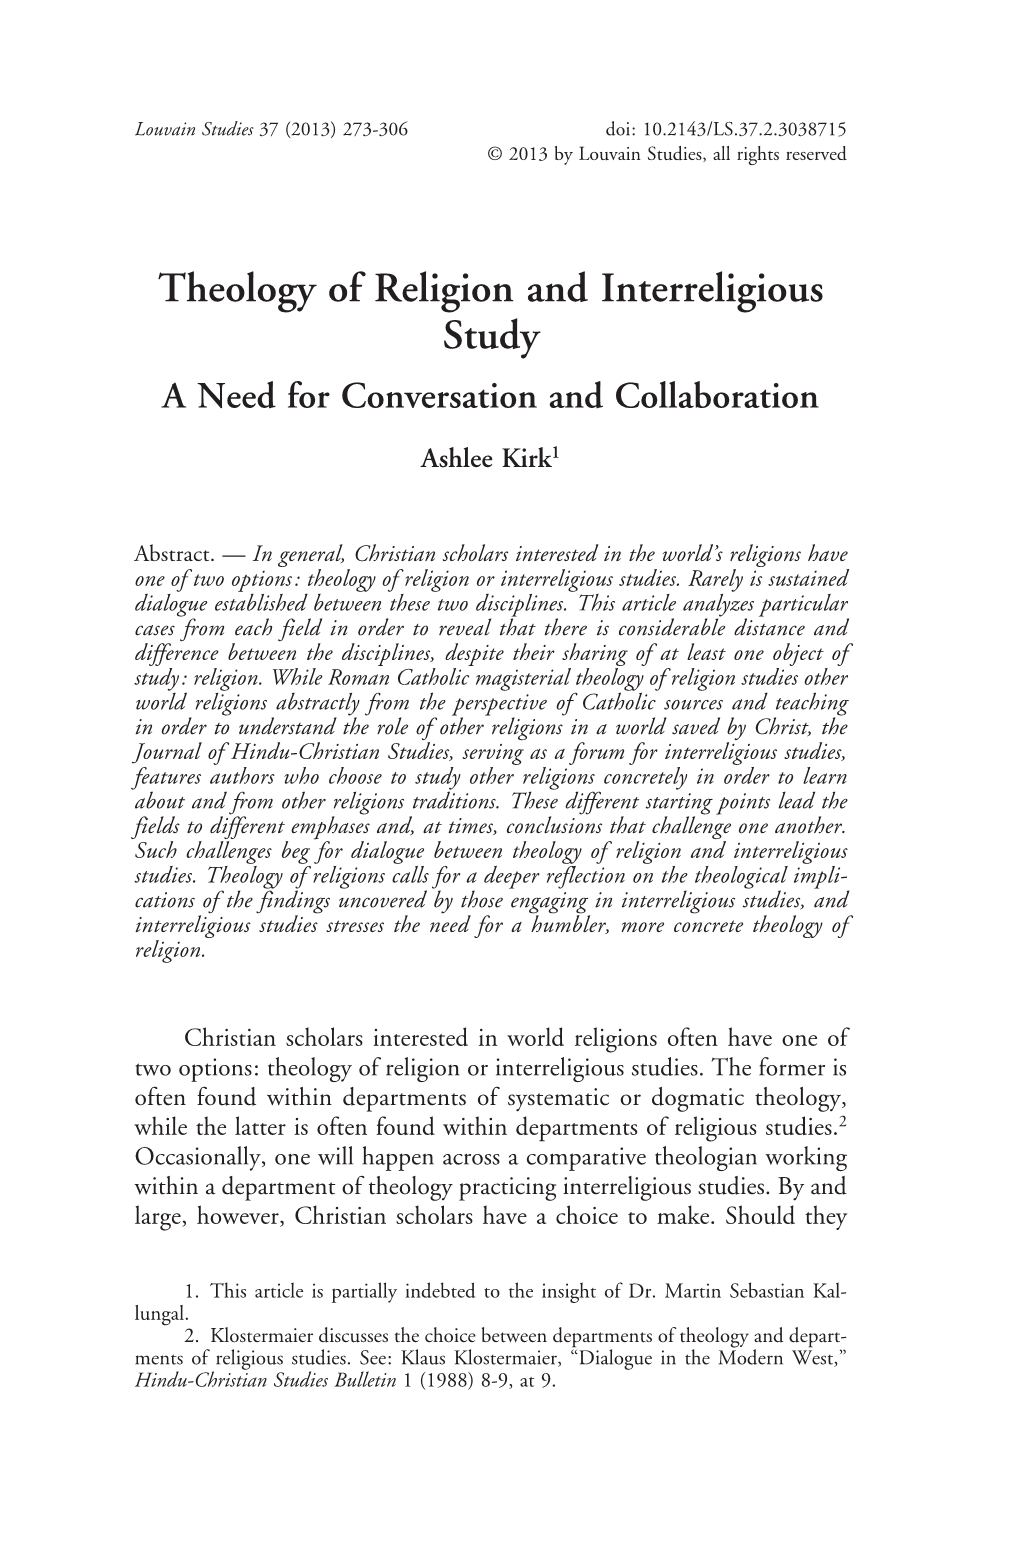 Theology of Religion and Interreligious Study a Need for Conversation and Collaboration